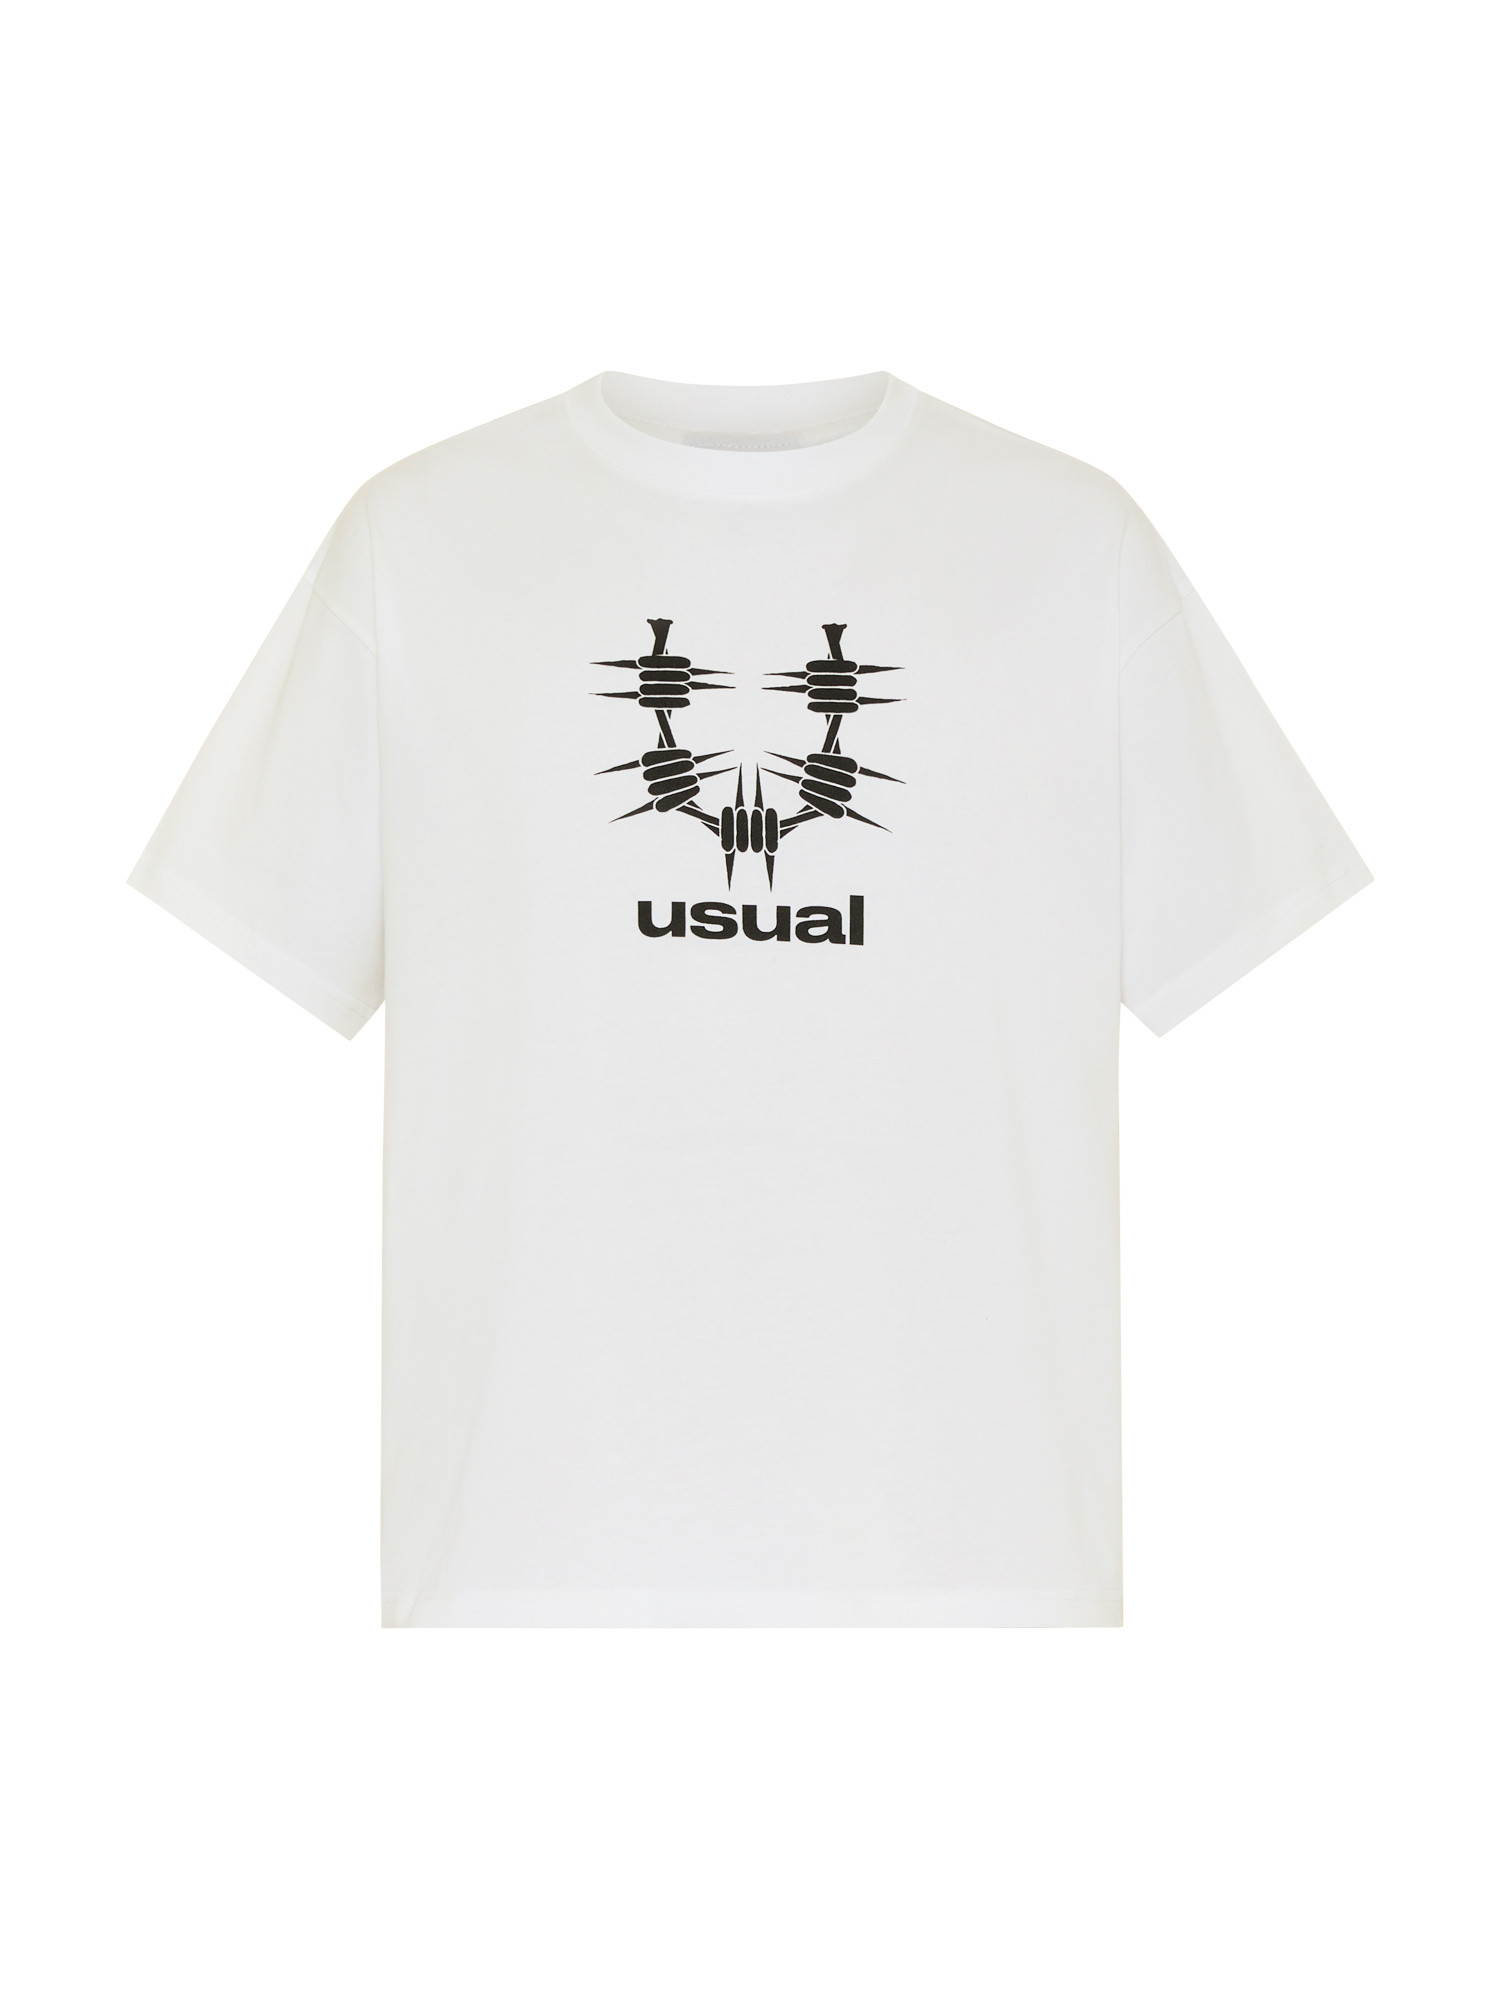 Usual - About T-Shirt, White, large image number 0